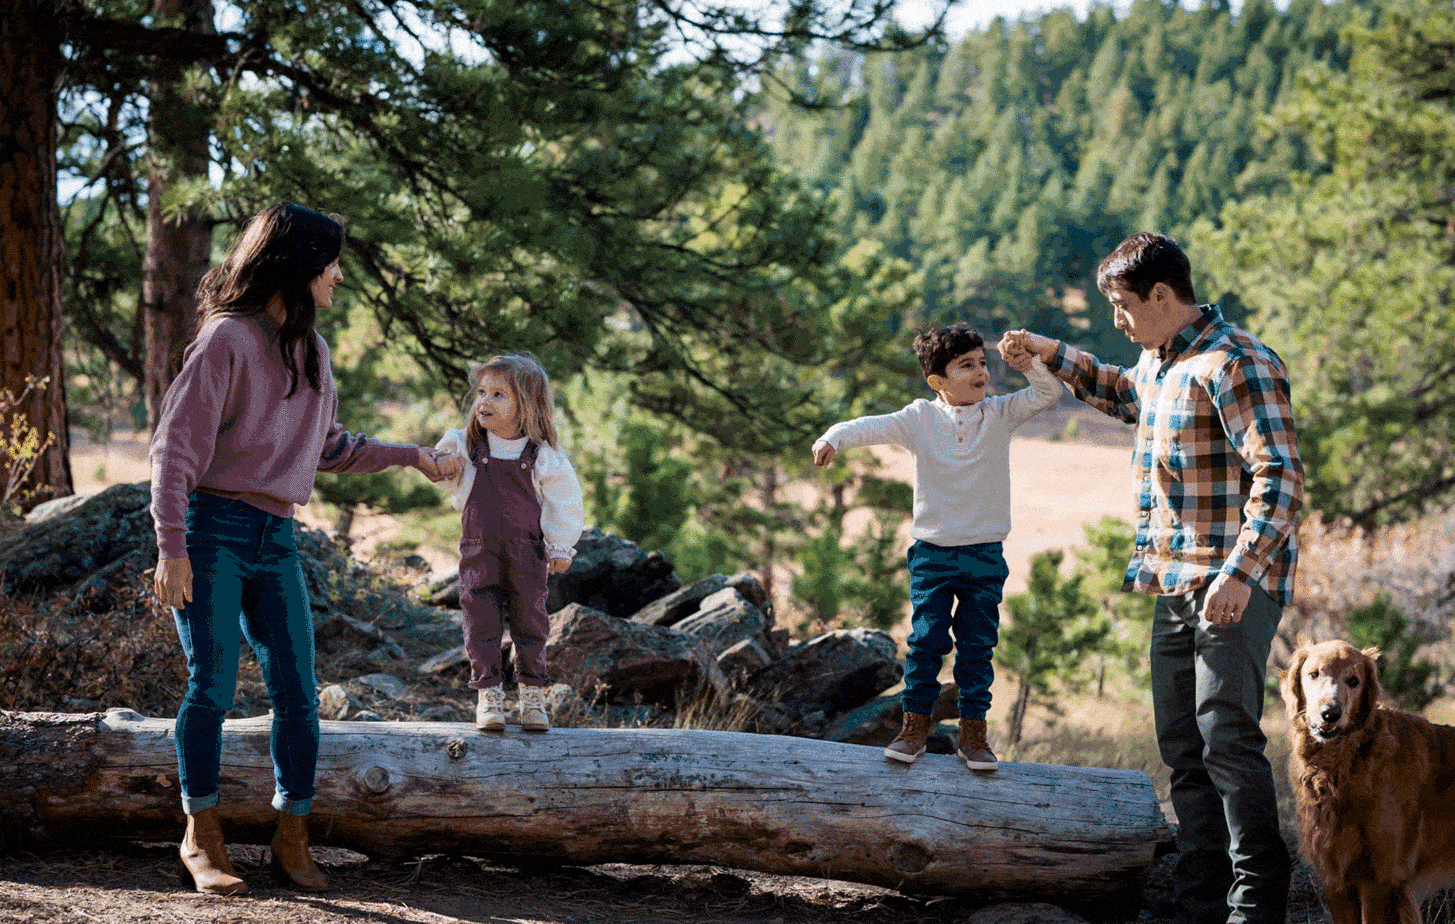 how to create high quality gifs blog image #2 of children jumping off a log with their parents' hands